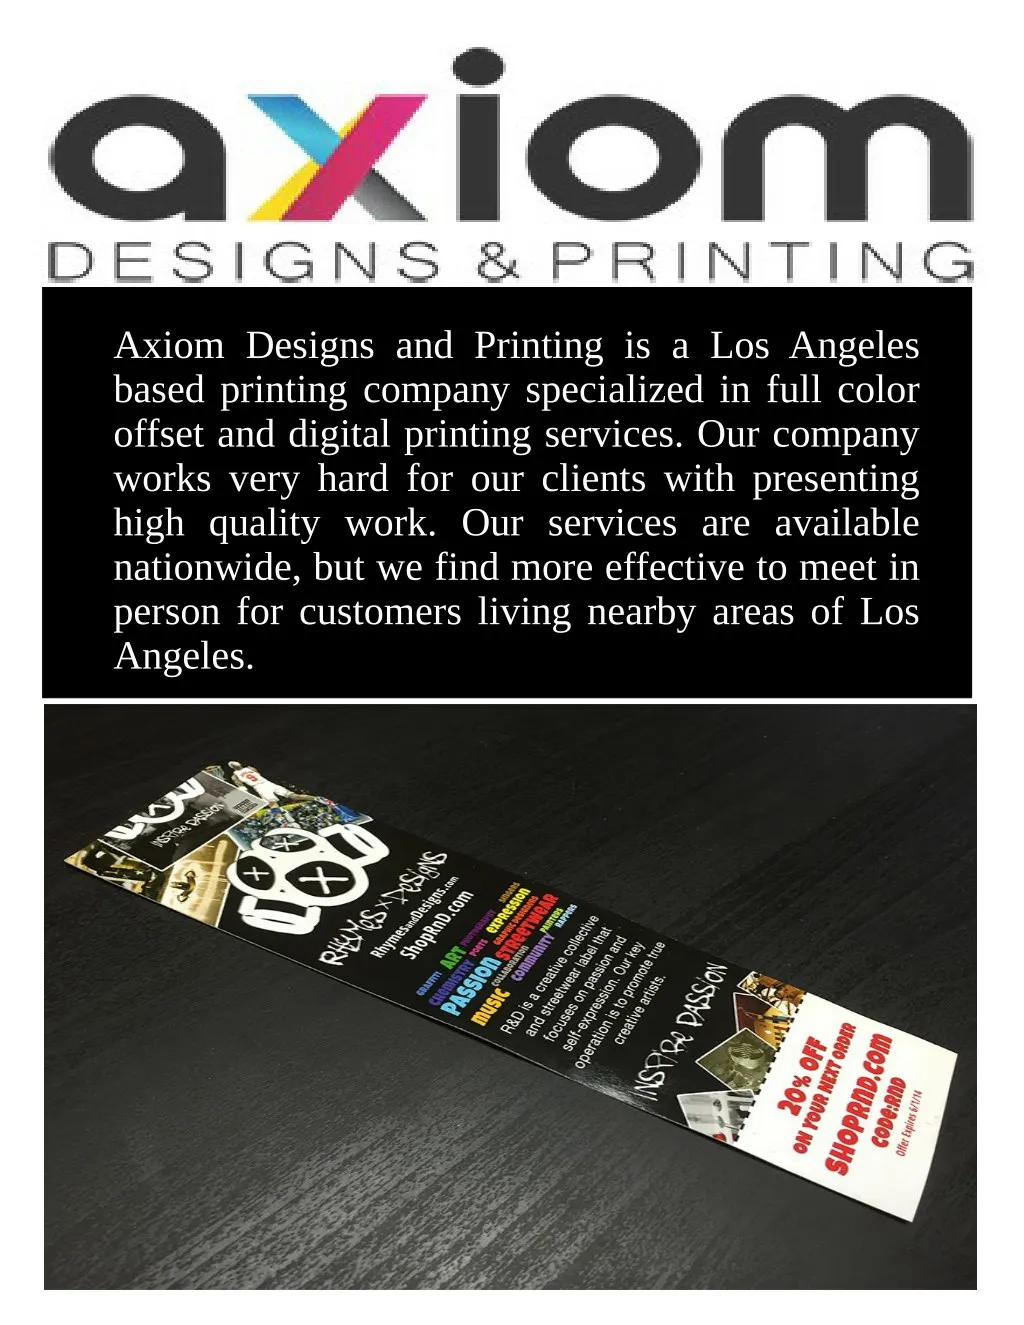 axiom designs and printing is a los angeles based